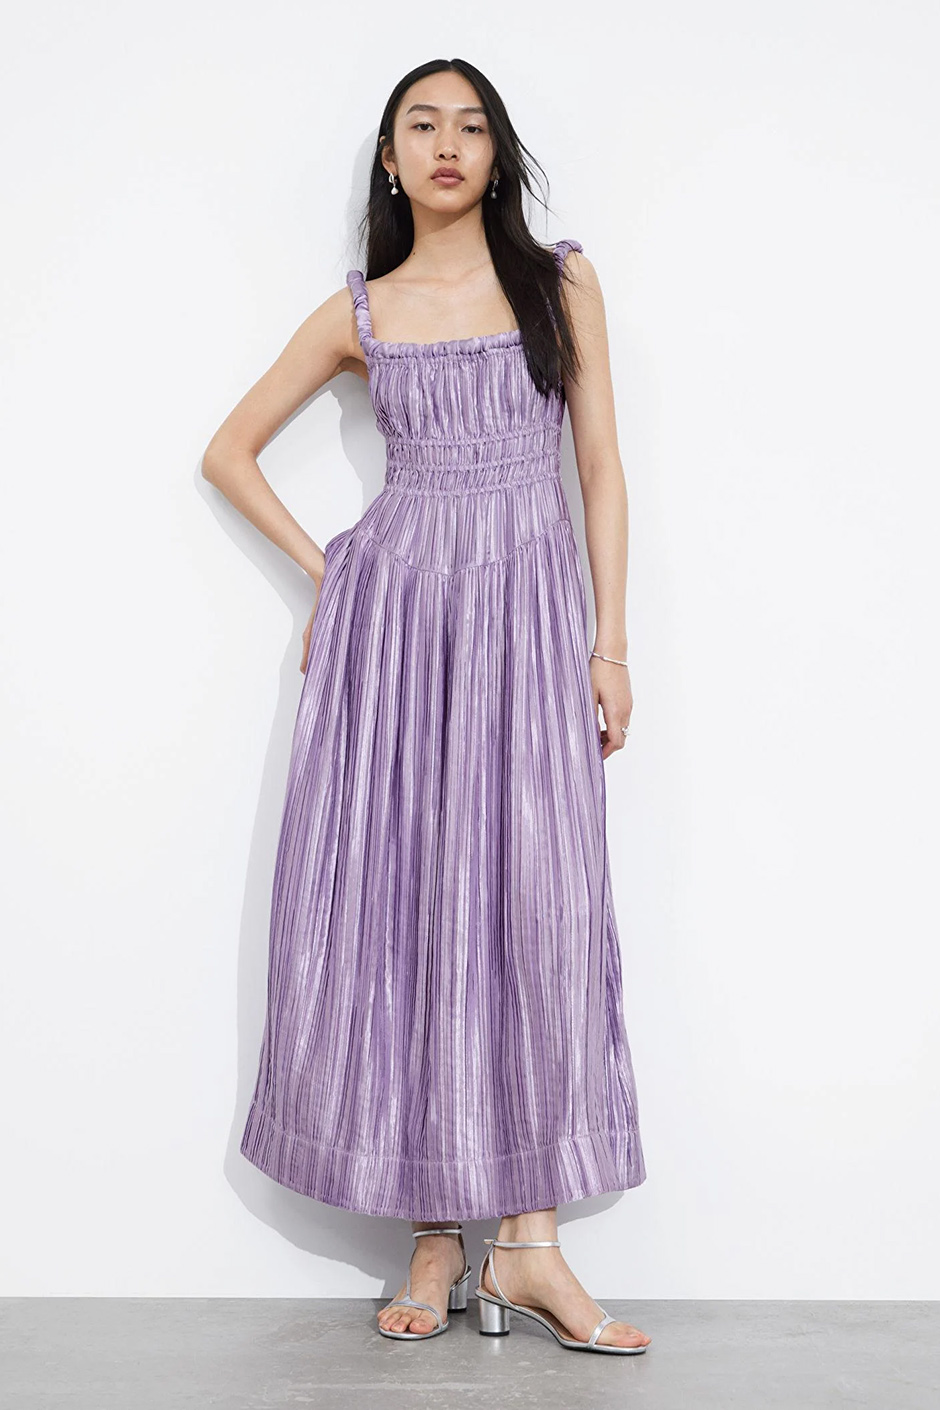 Shirred satin midi dress in shimmery lilac colour from & Other Stories for summer wedding guest dress idea